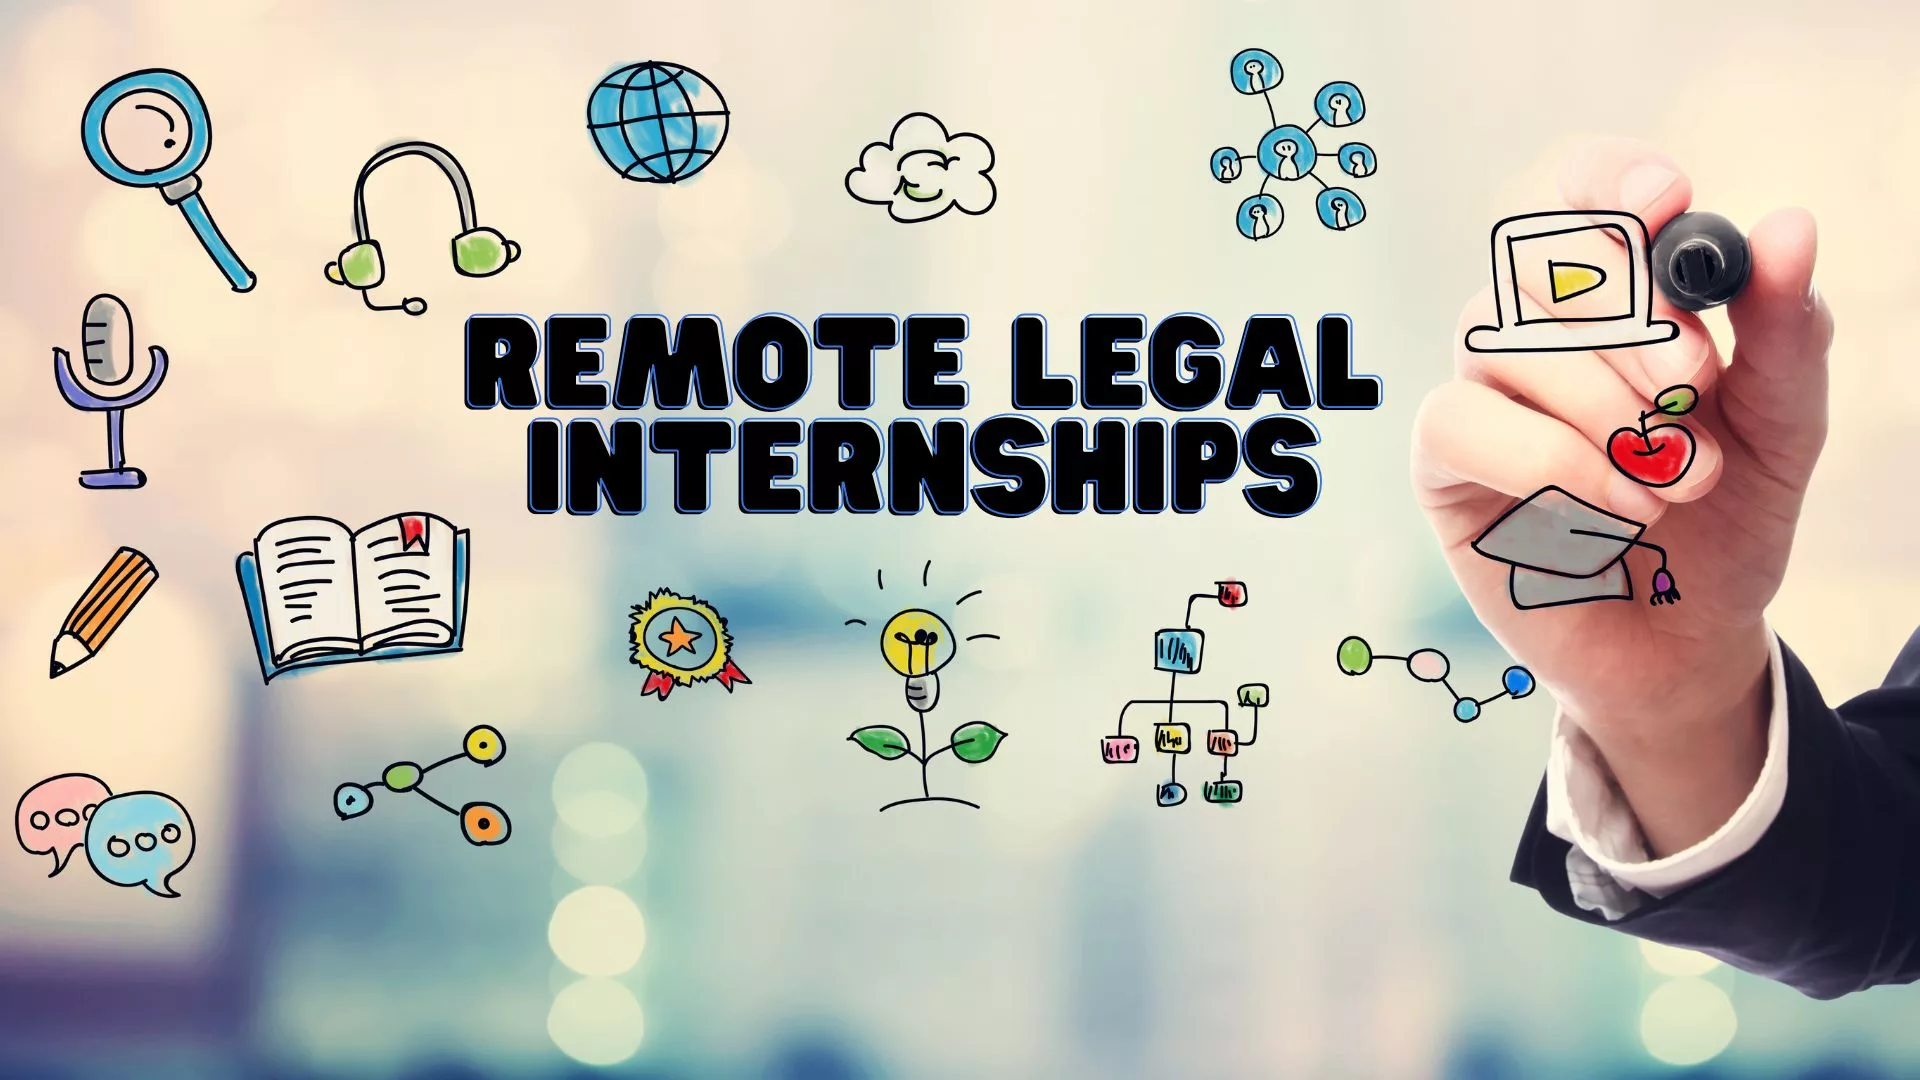 5 Sources for Remote Legal Internships in the United States